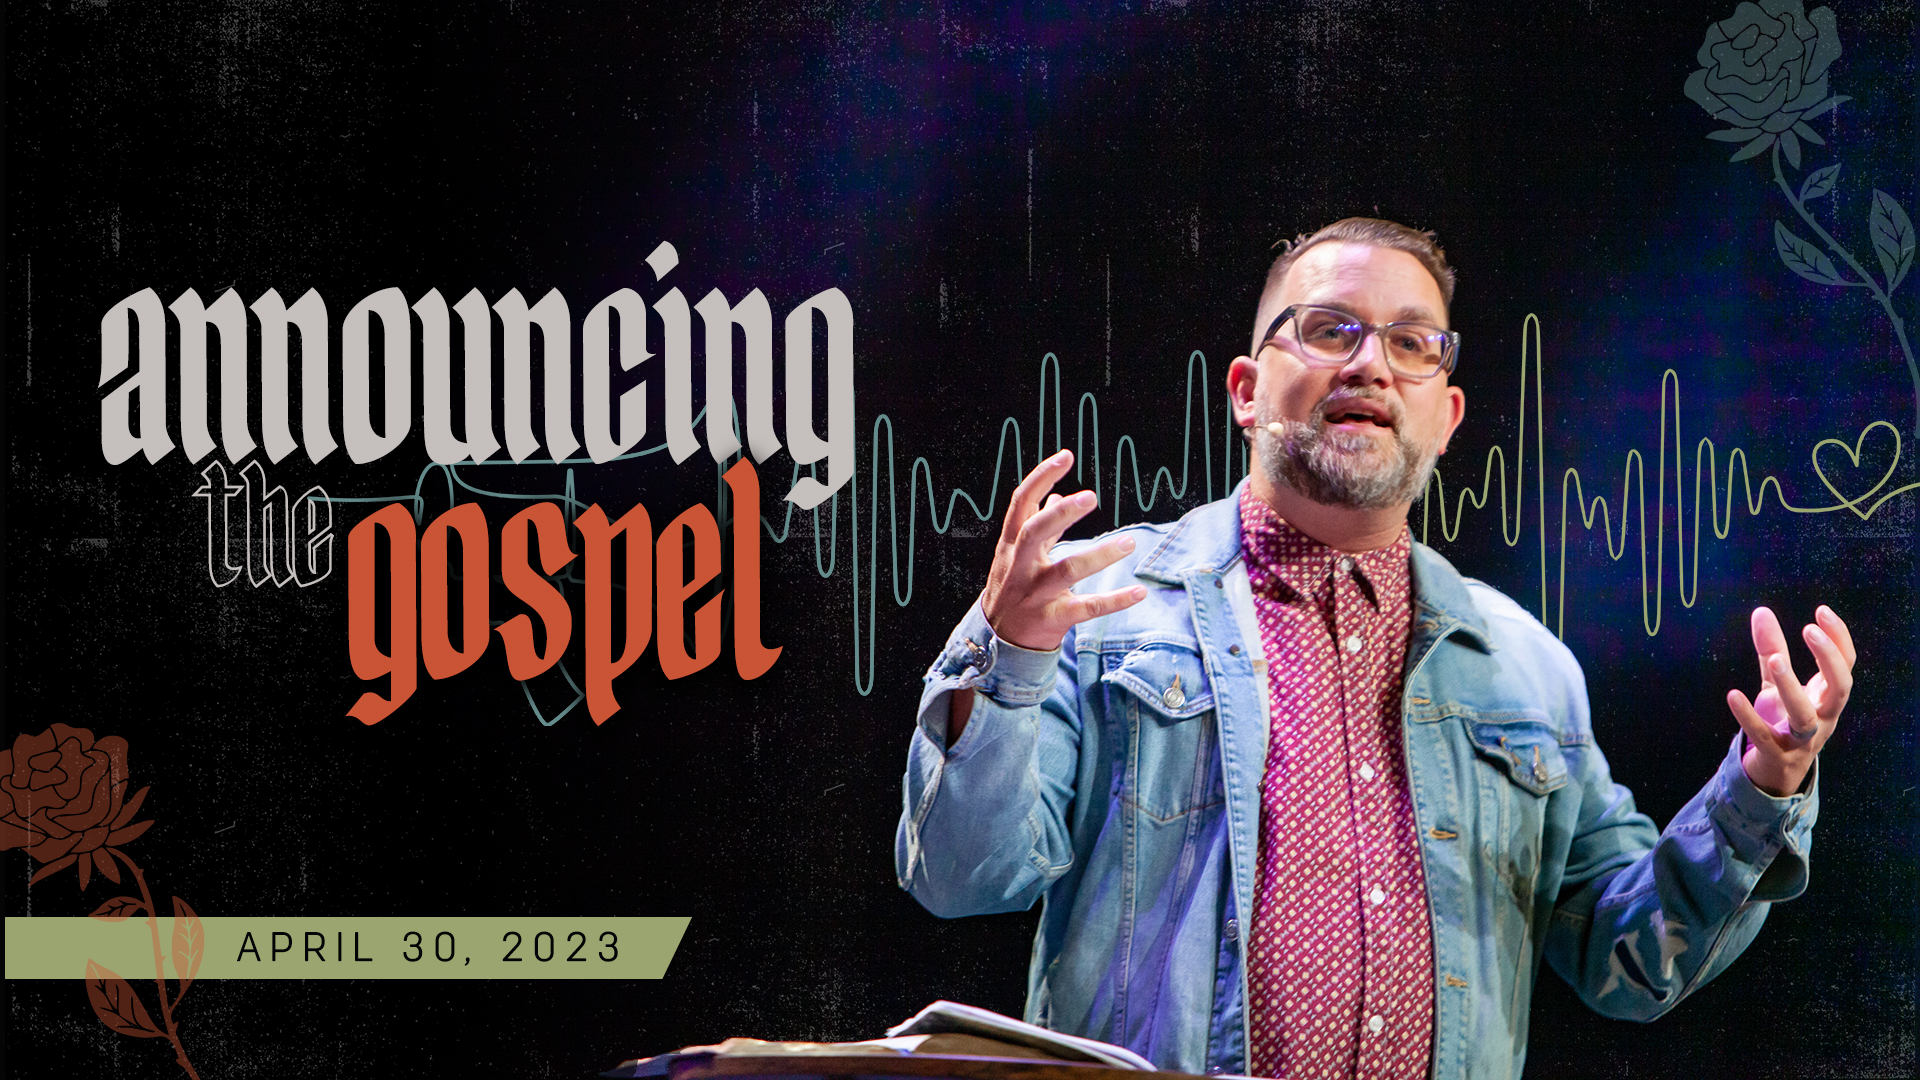 Announcing the Gospel Image